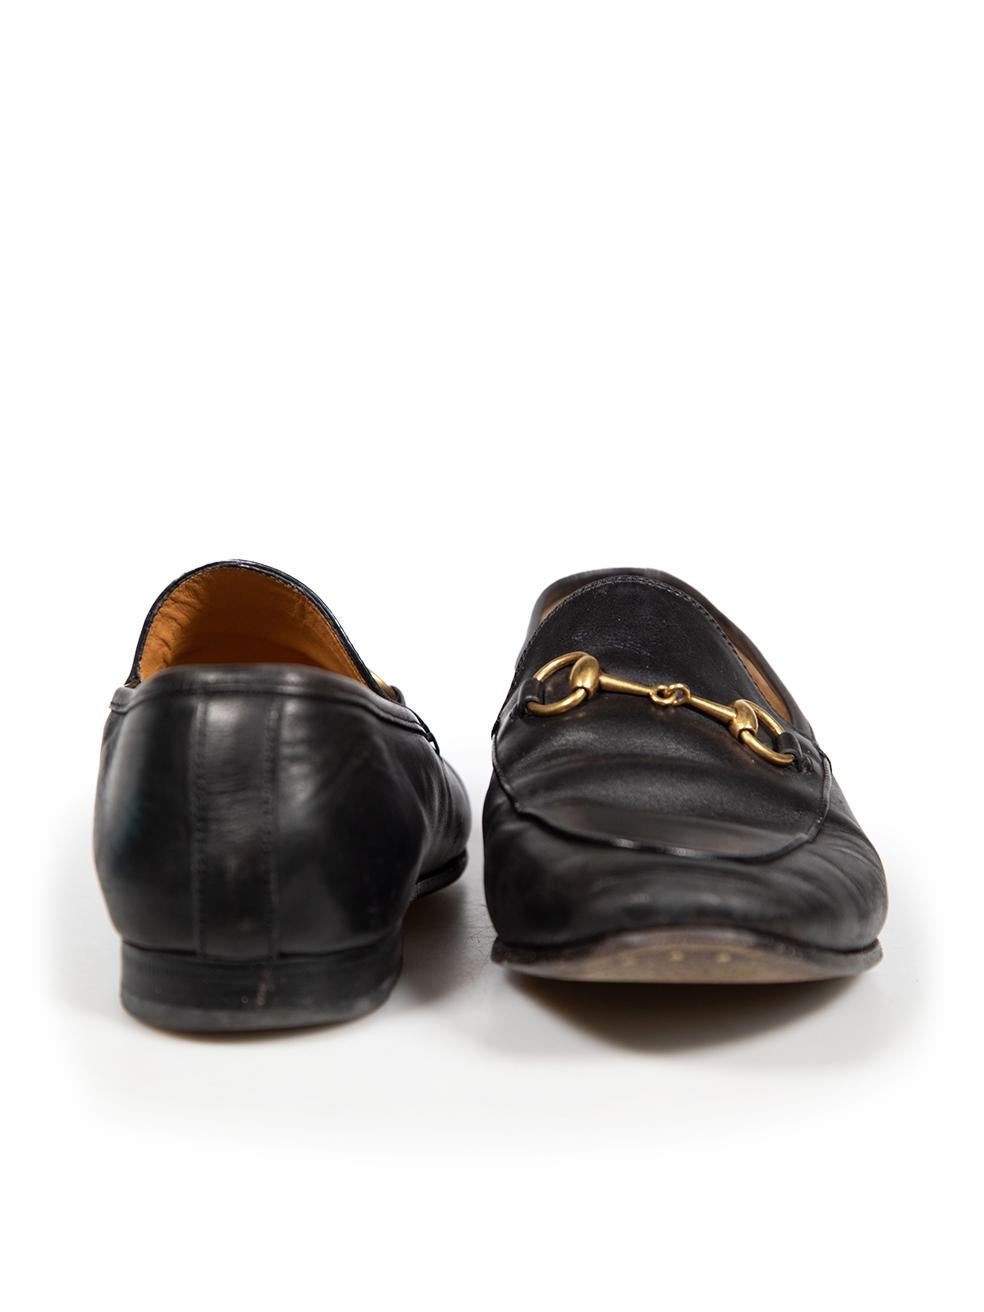 Gucci Black Leather Horsebit Jordaan Flat Loafers Size IT 39 In Excellent Condition For Sale In London, GB